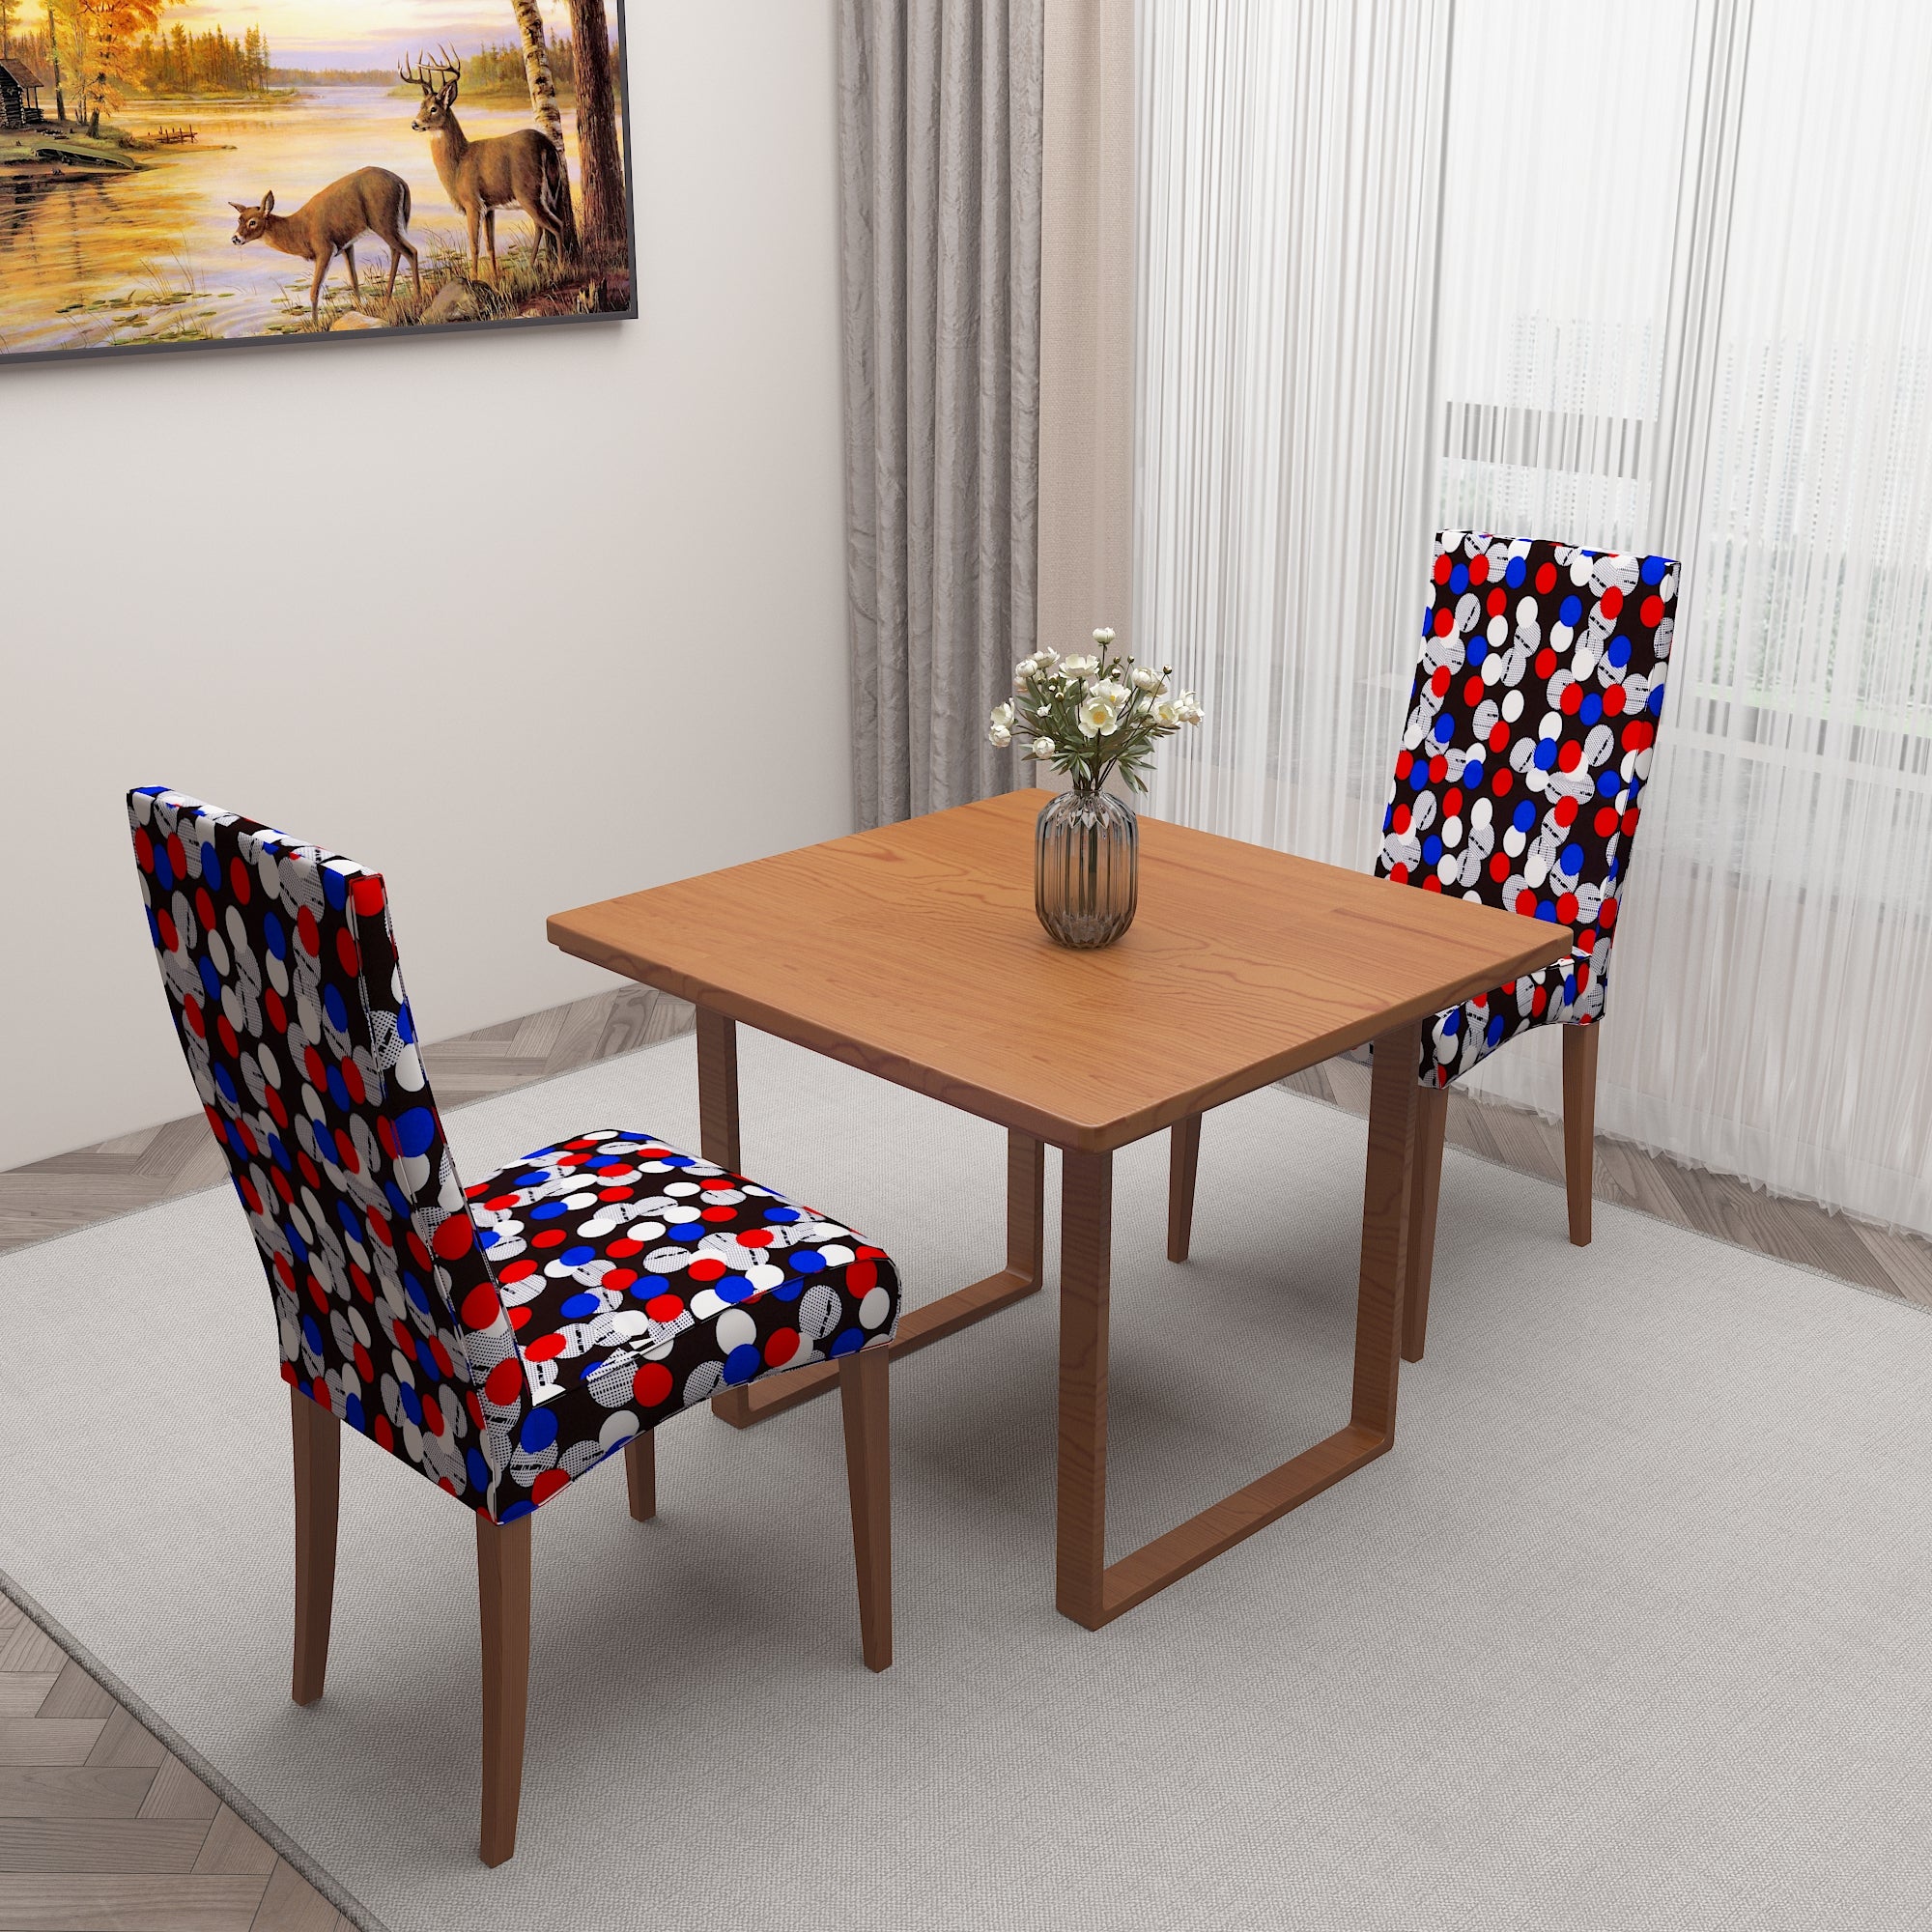 Polyester Spandex Stretchable Printed Chair Cover, MG19